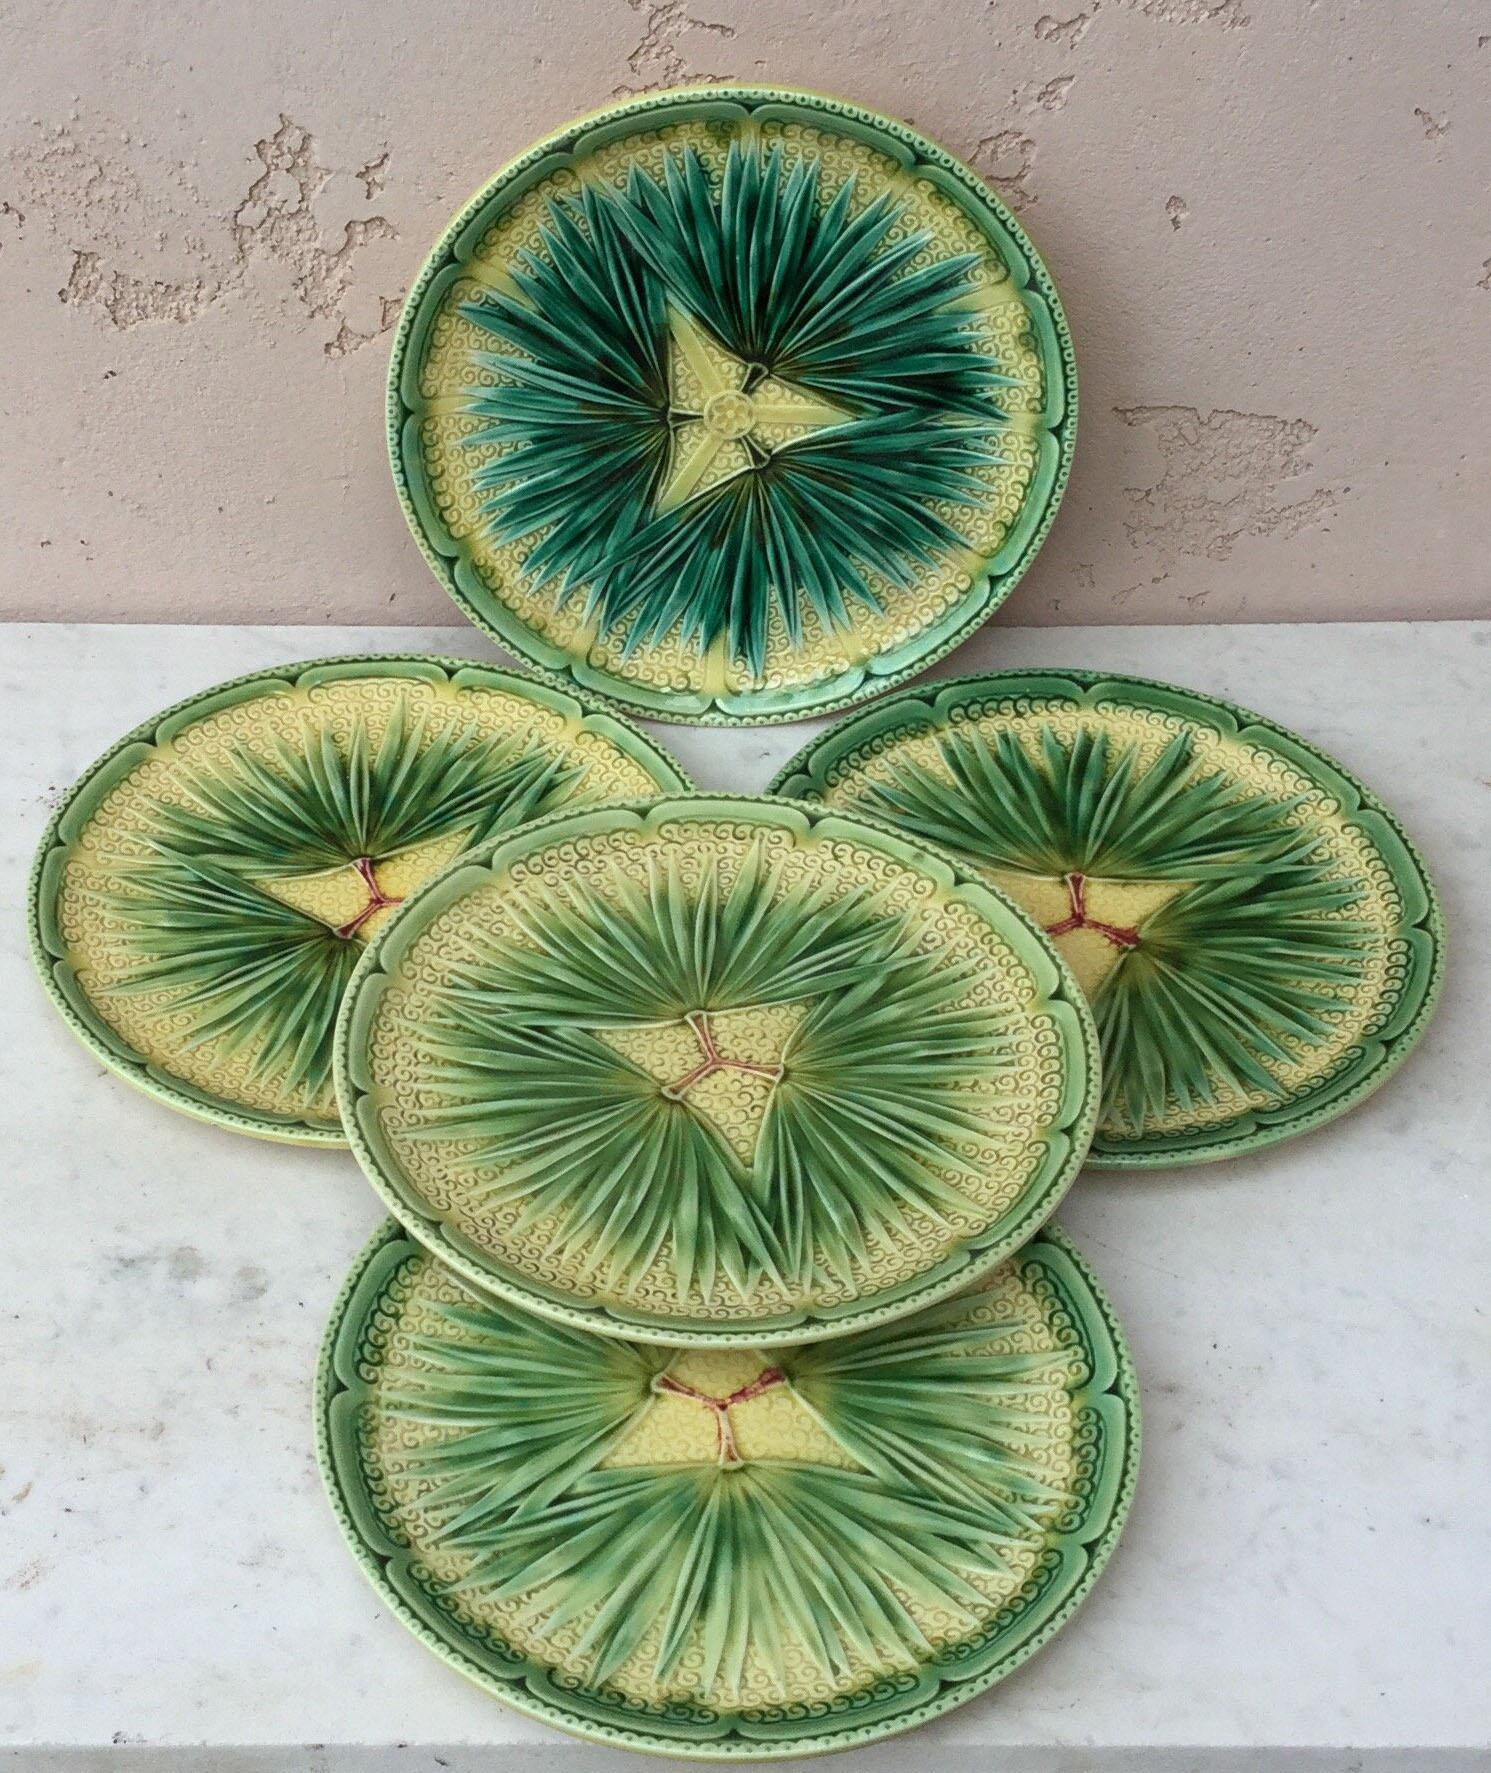 Late 19th Century French Green Majolica Plate with Leaves Circa 1890 For Sale